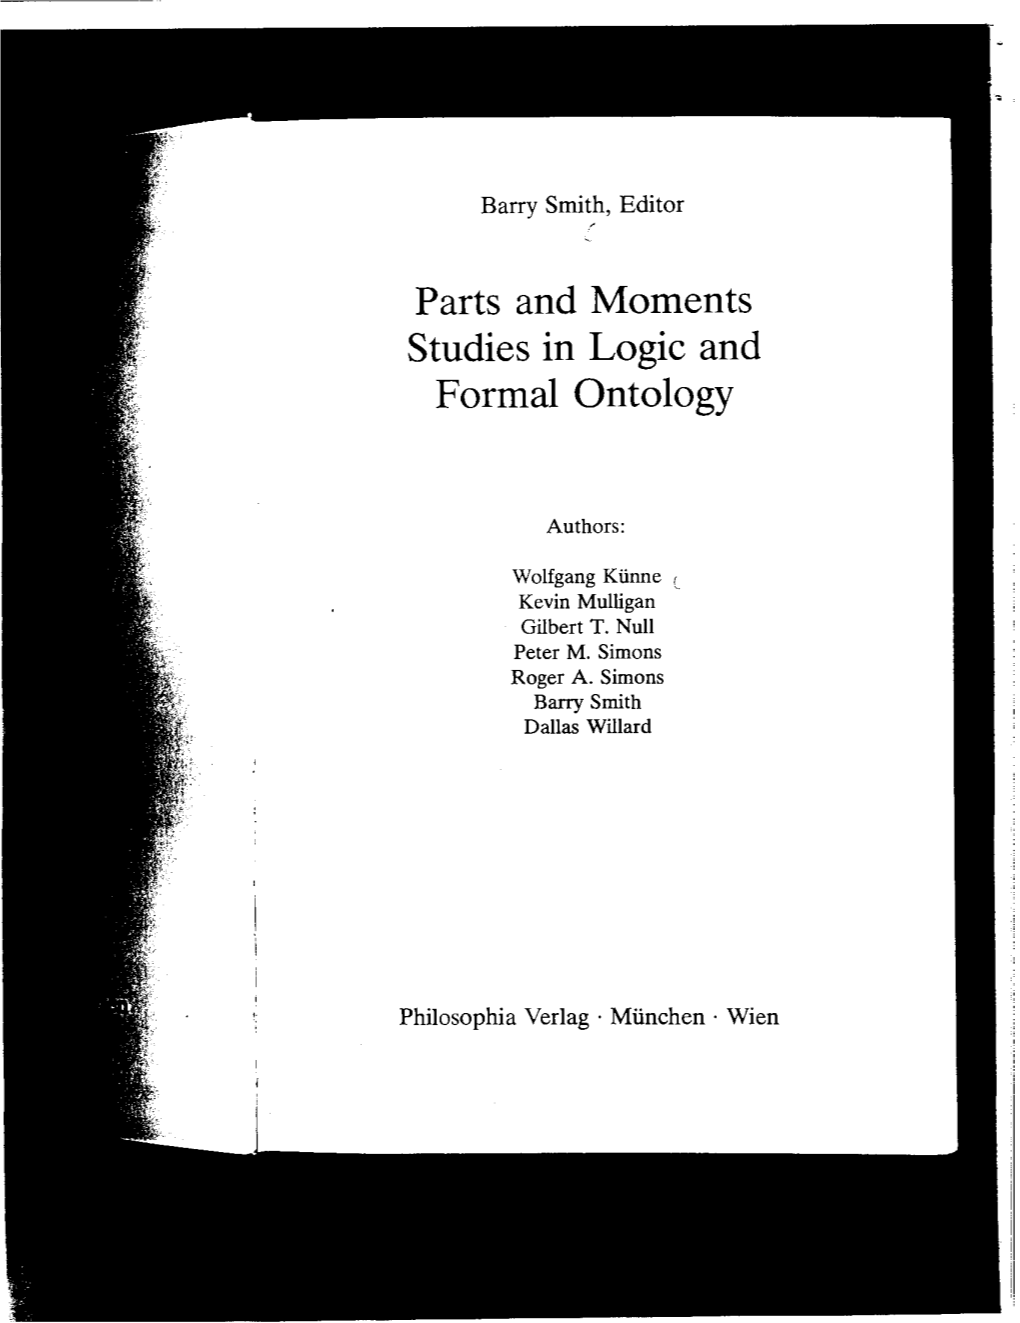 Parts and Moments Studies in Logic and Formal Ontology